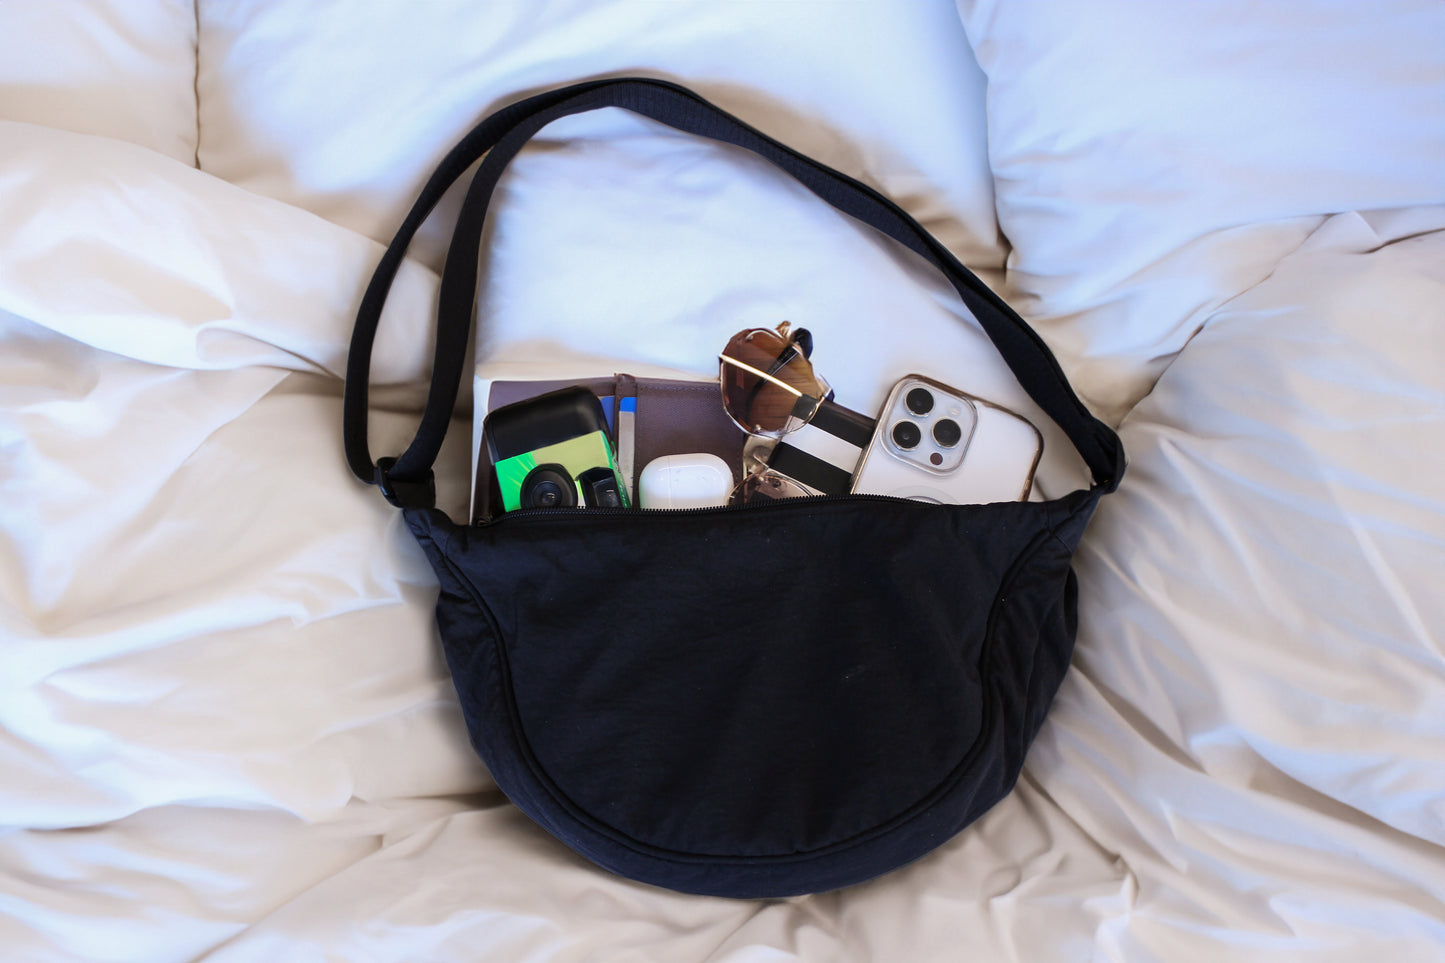 Traveler's Everyday Shoulder Bag with accessories and daily essentials